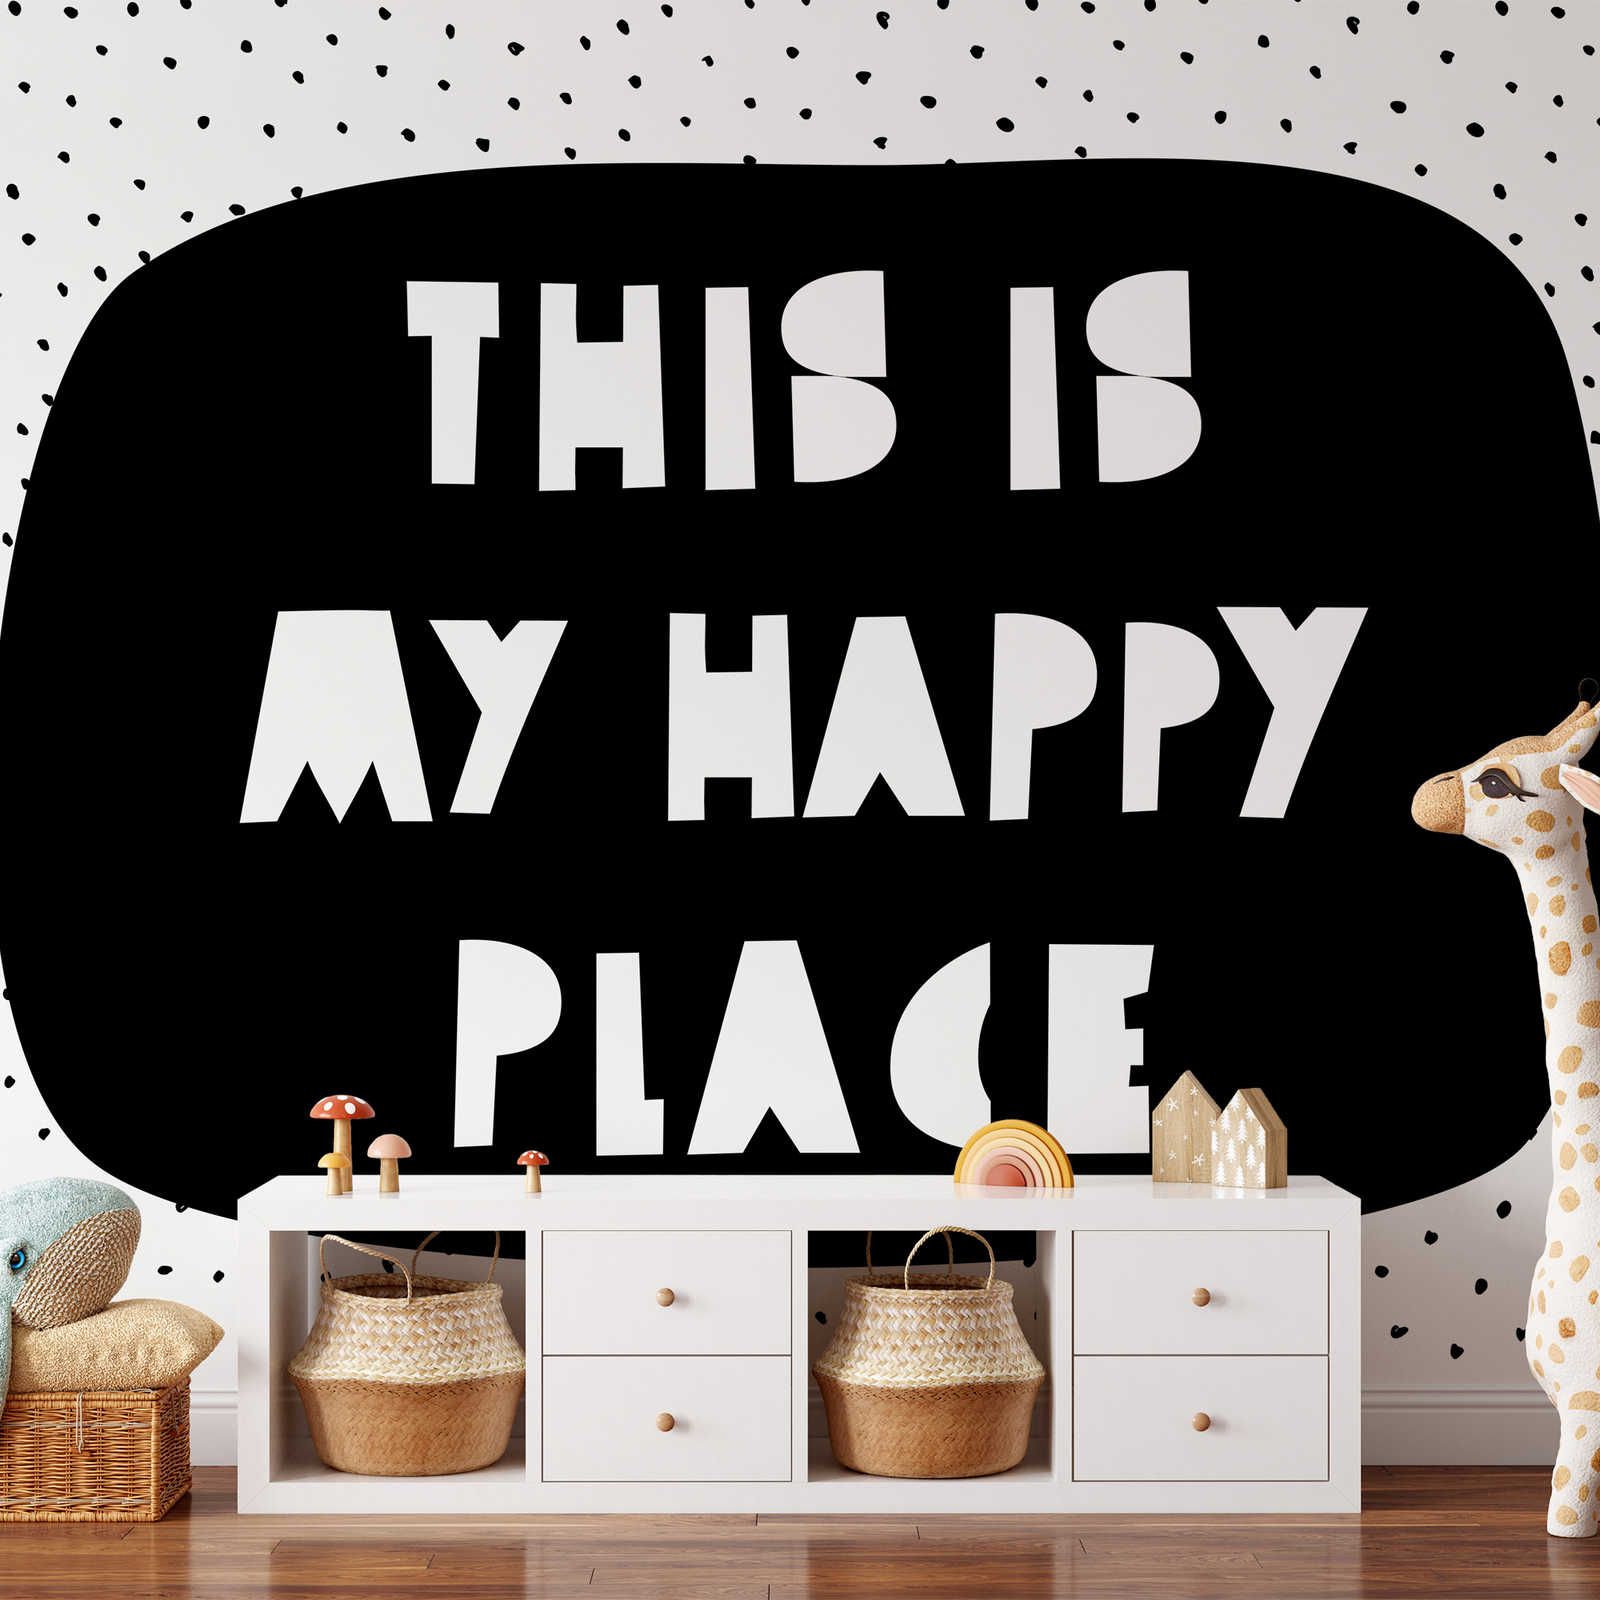 Photo wallpaper for children's room with lettering "This is my happy place" - Textured non-woven
